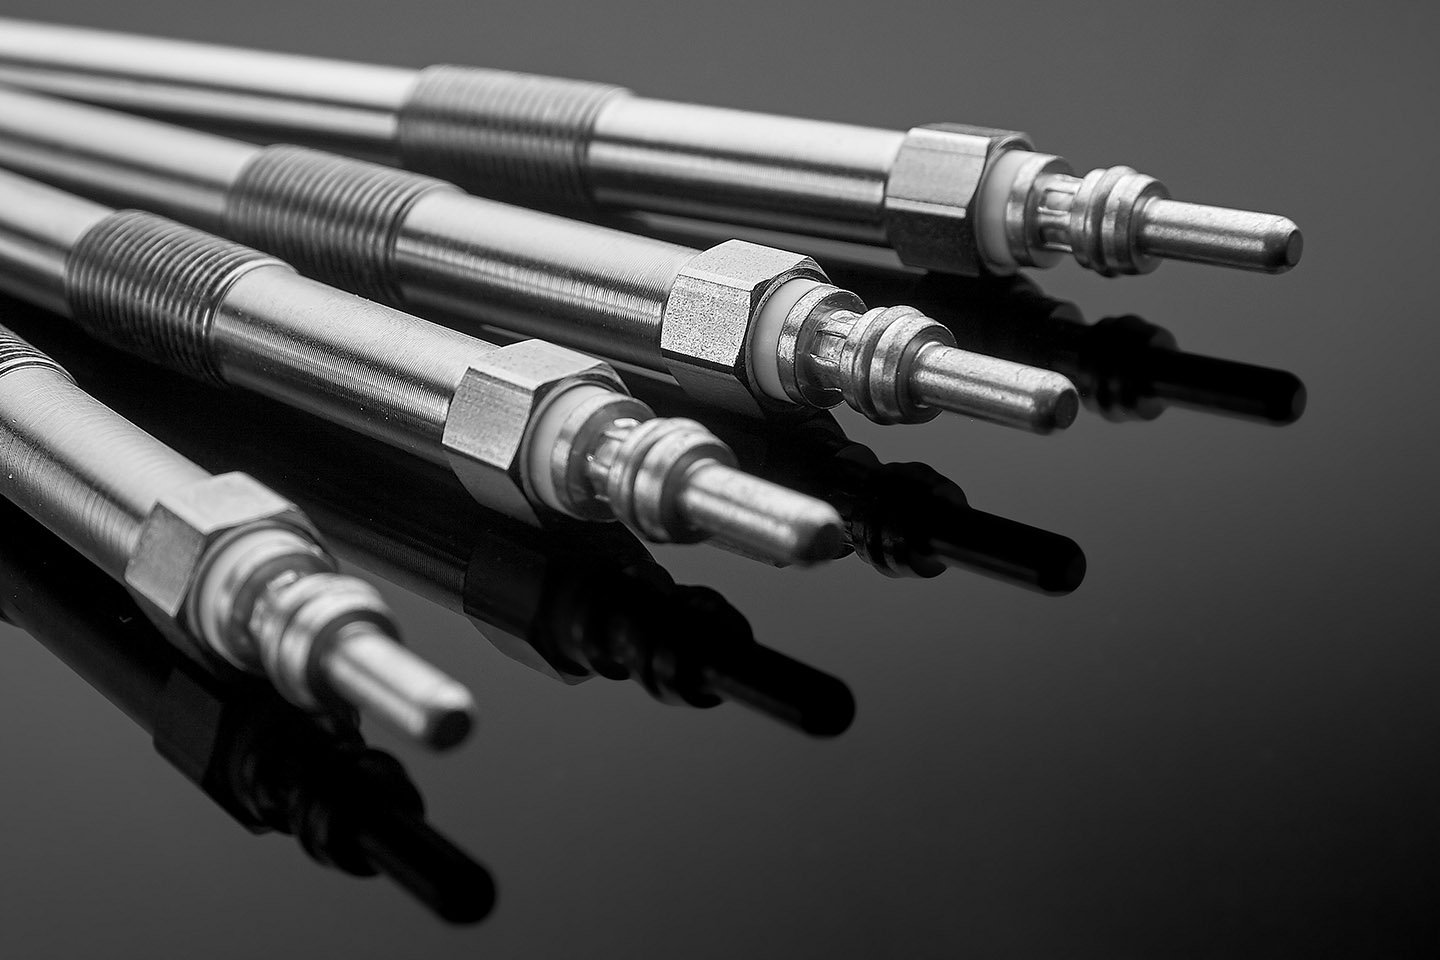 glow plugs for a diesel engine